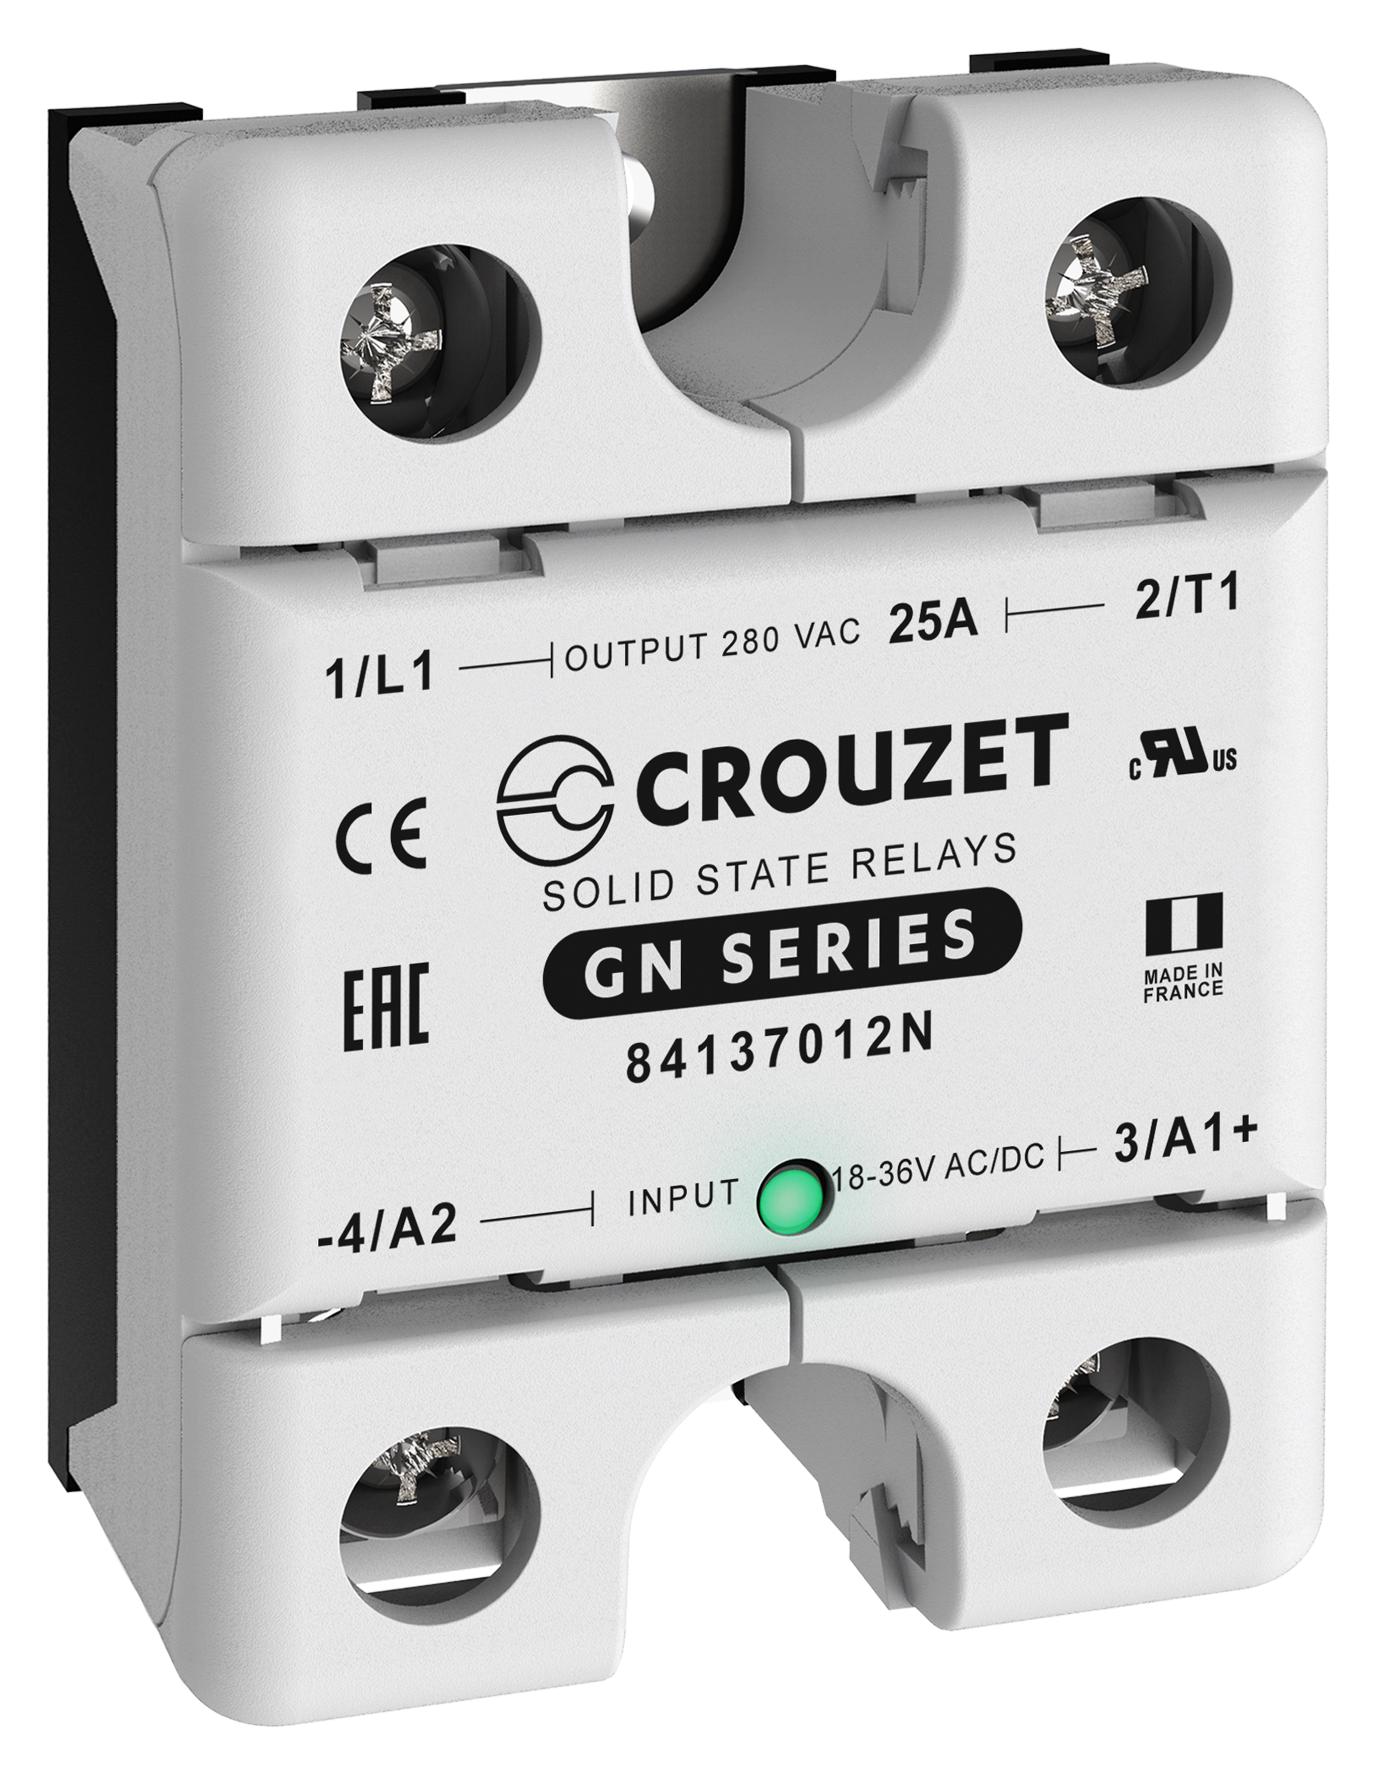 84137012N SOLID STATE RELAY, 25A, 24-280VAC, PANEL CROUZET